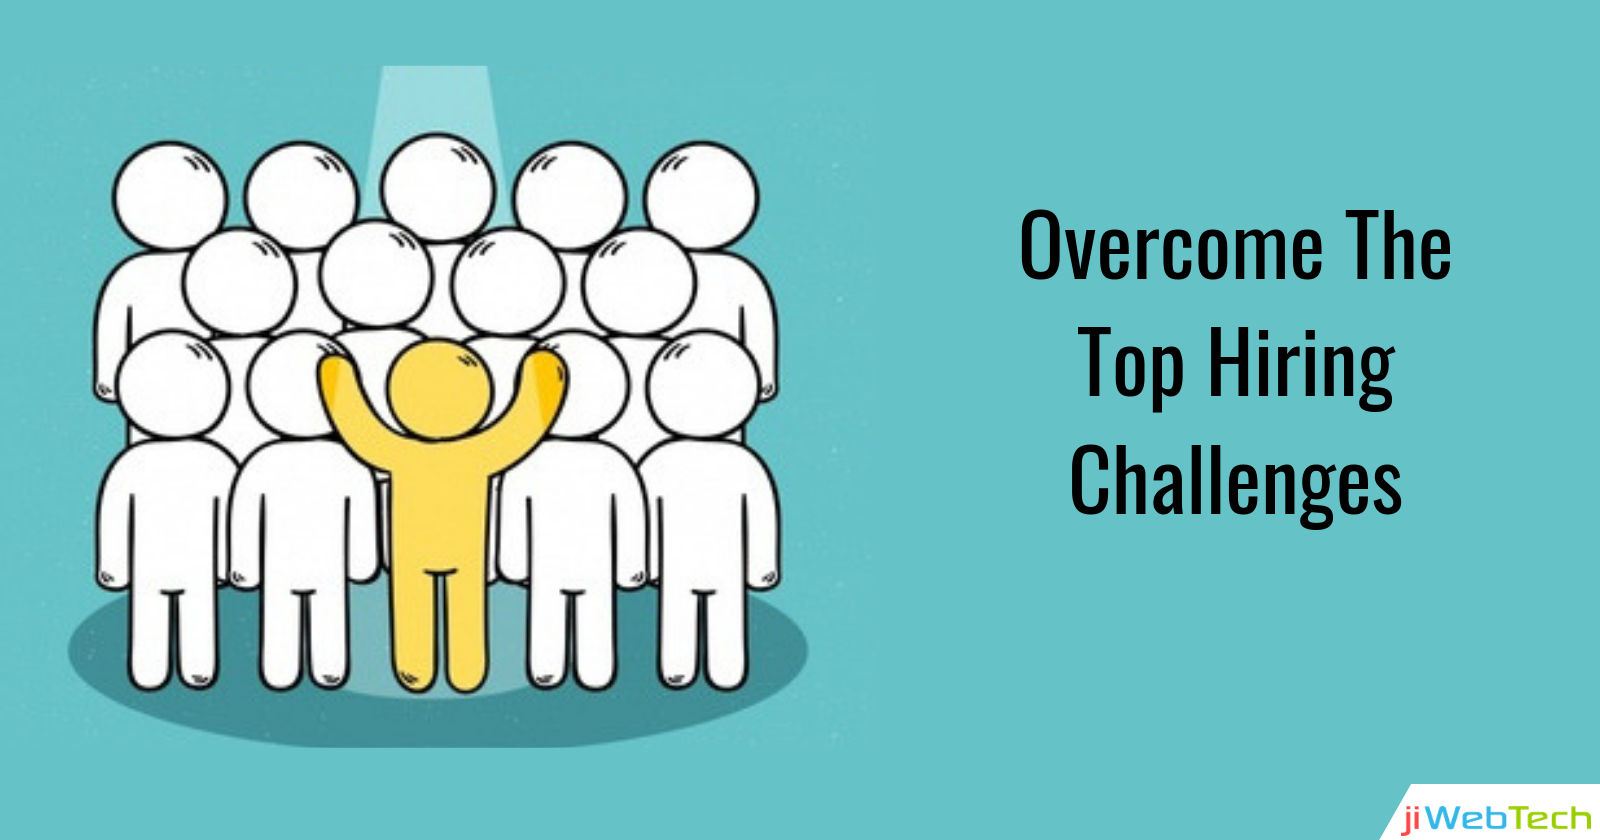 The Most Common Recruiting Challenges and How to Overcome Them